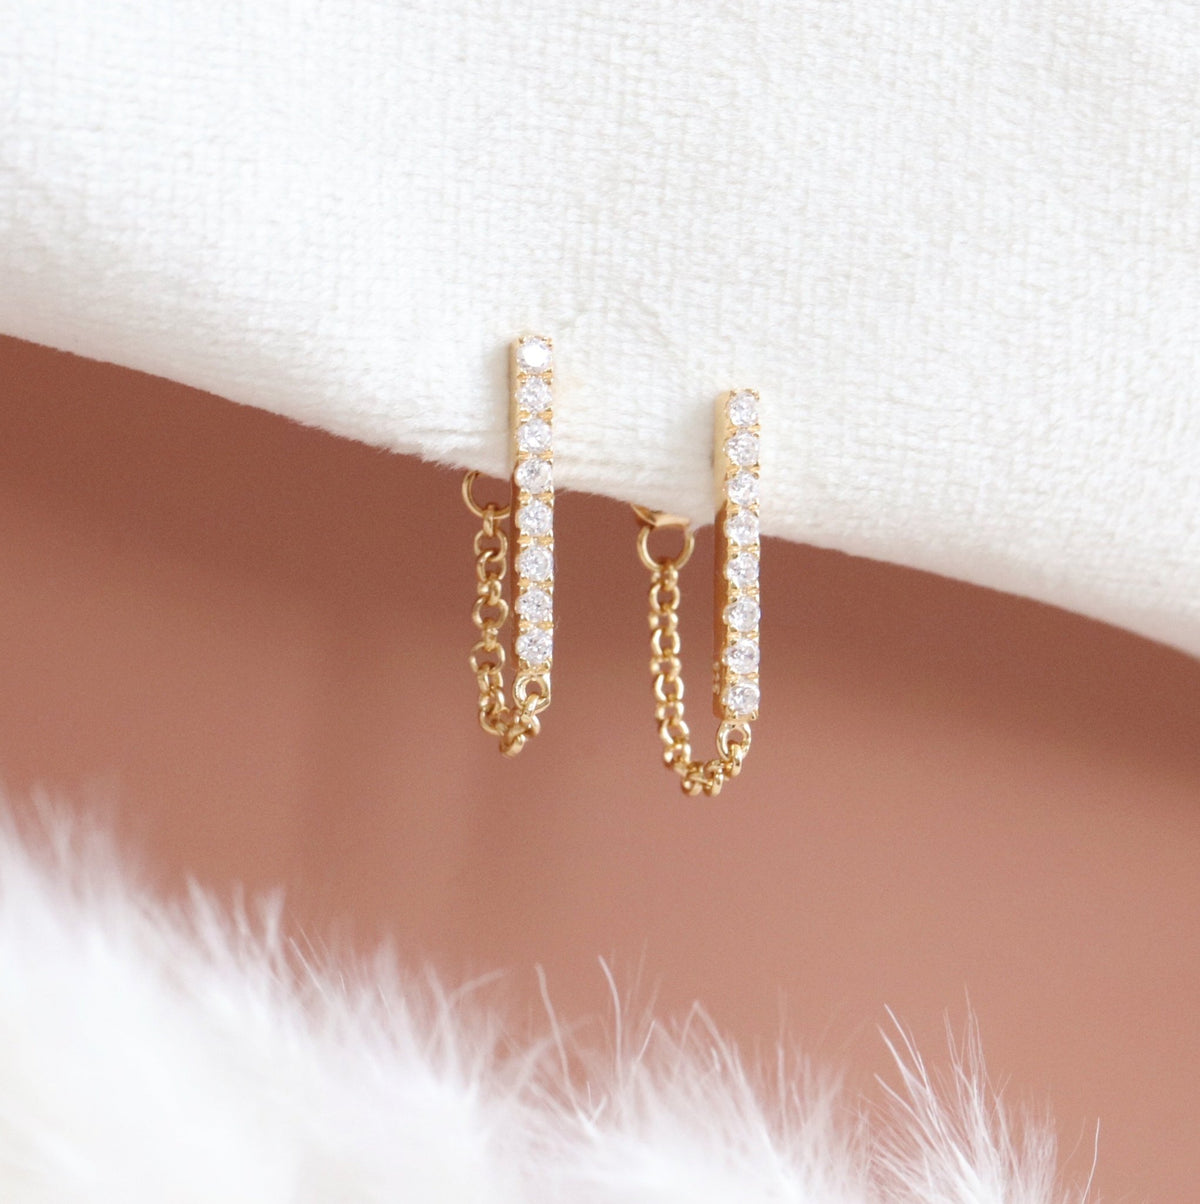 LOVE BAR CHAIN EARRINGS - CUBIC ZIRCONIA &amp; GOLD - SO PRETTY CARA COTTER